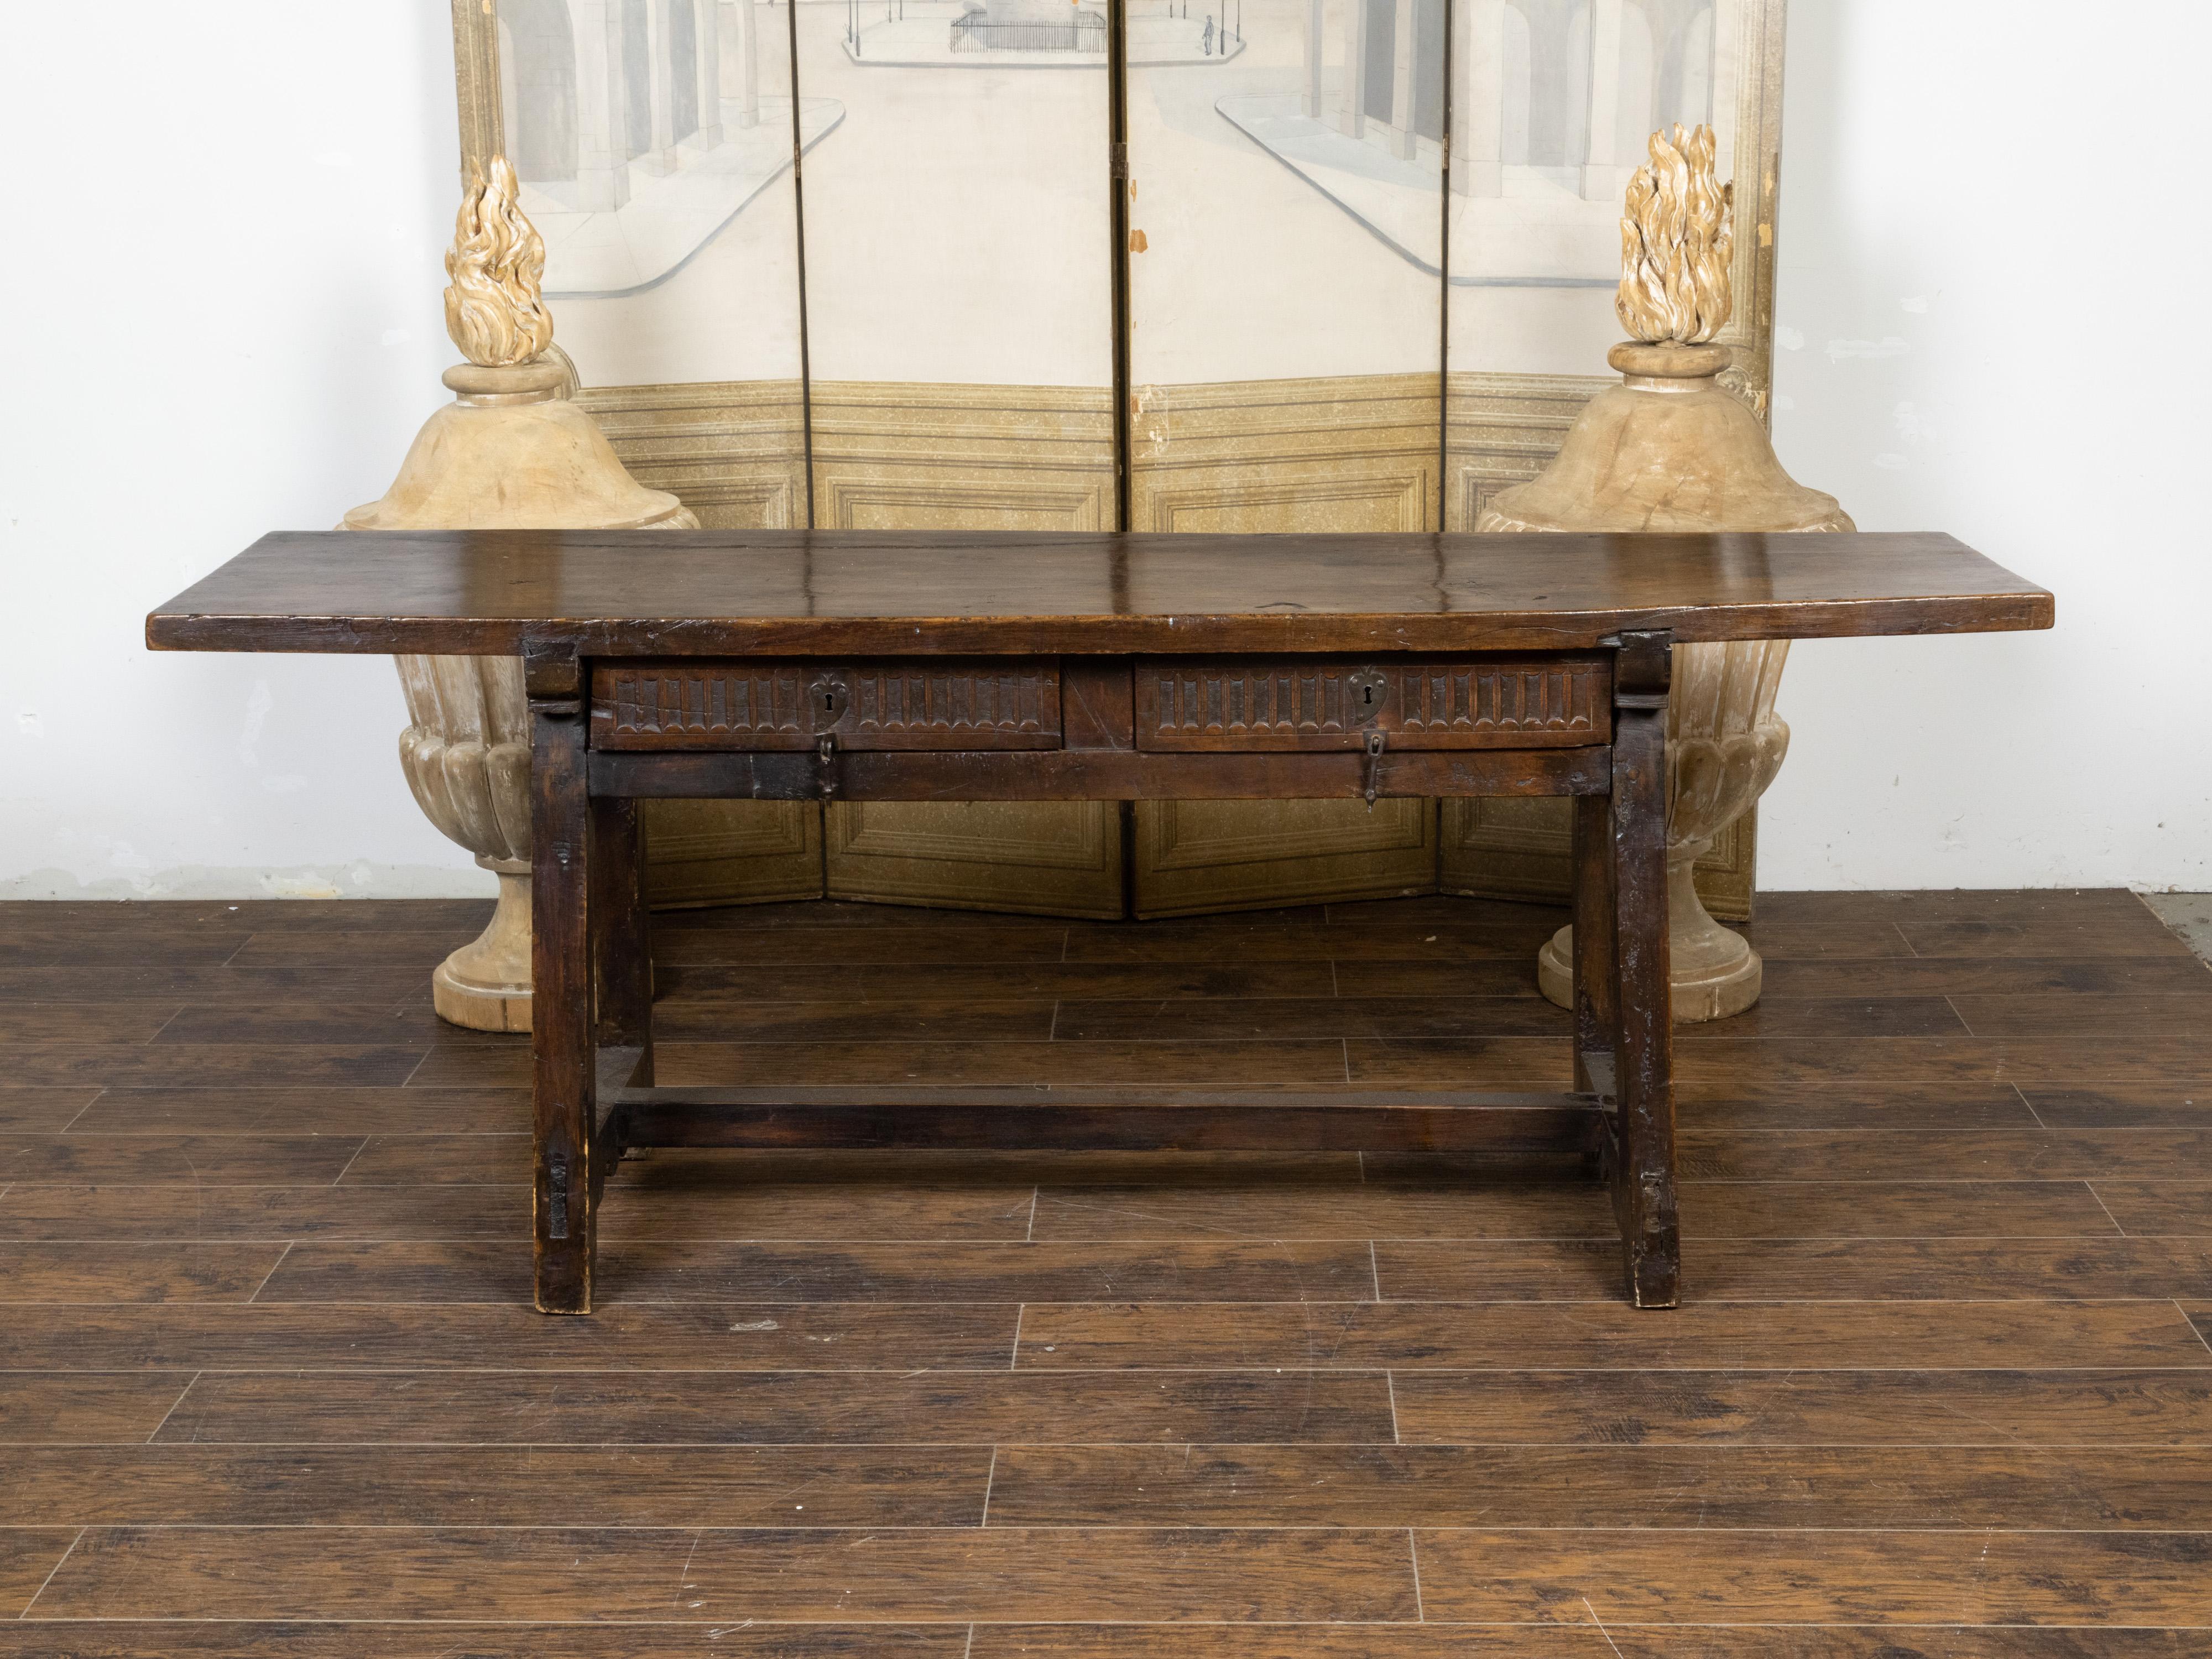 A Spanish wooden refectoire table from the early 19th century, with two drawers, fluted accents, A-Frame trestle base and great character. Created in Spain during the early years of the 19th century, this refectoire table could be used as a console